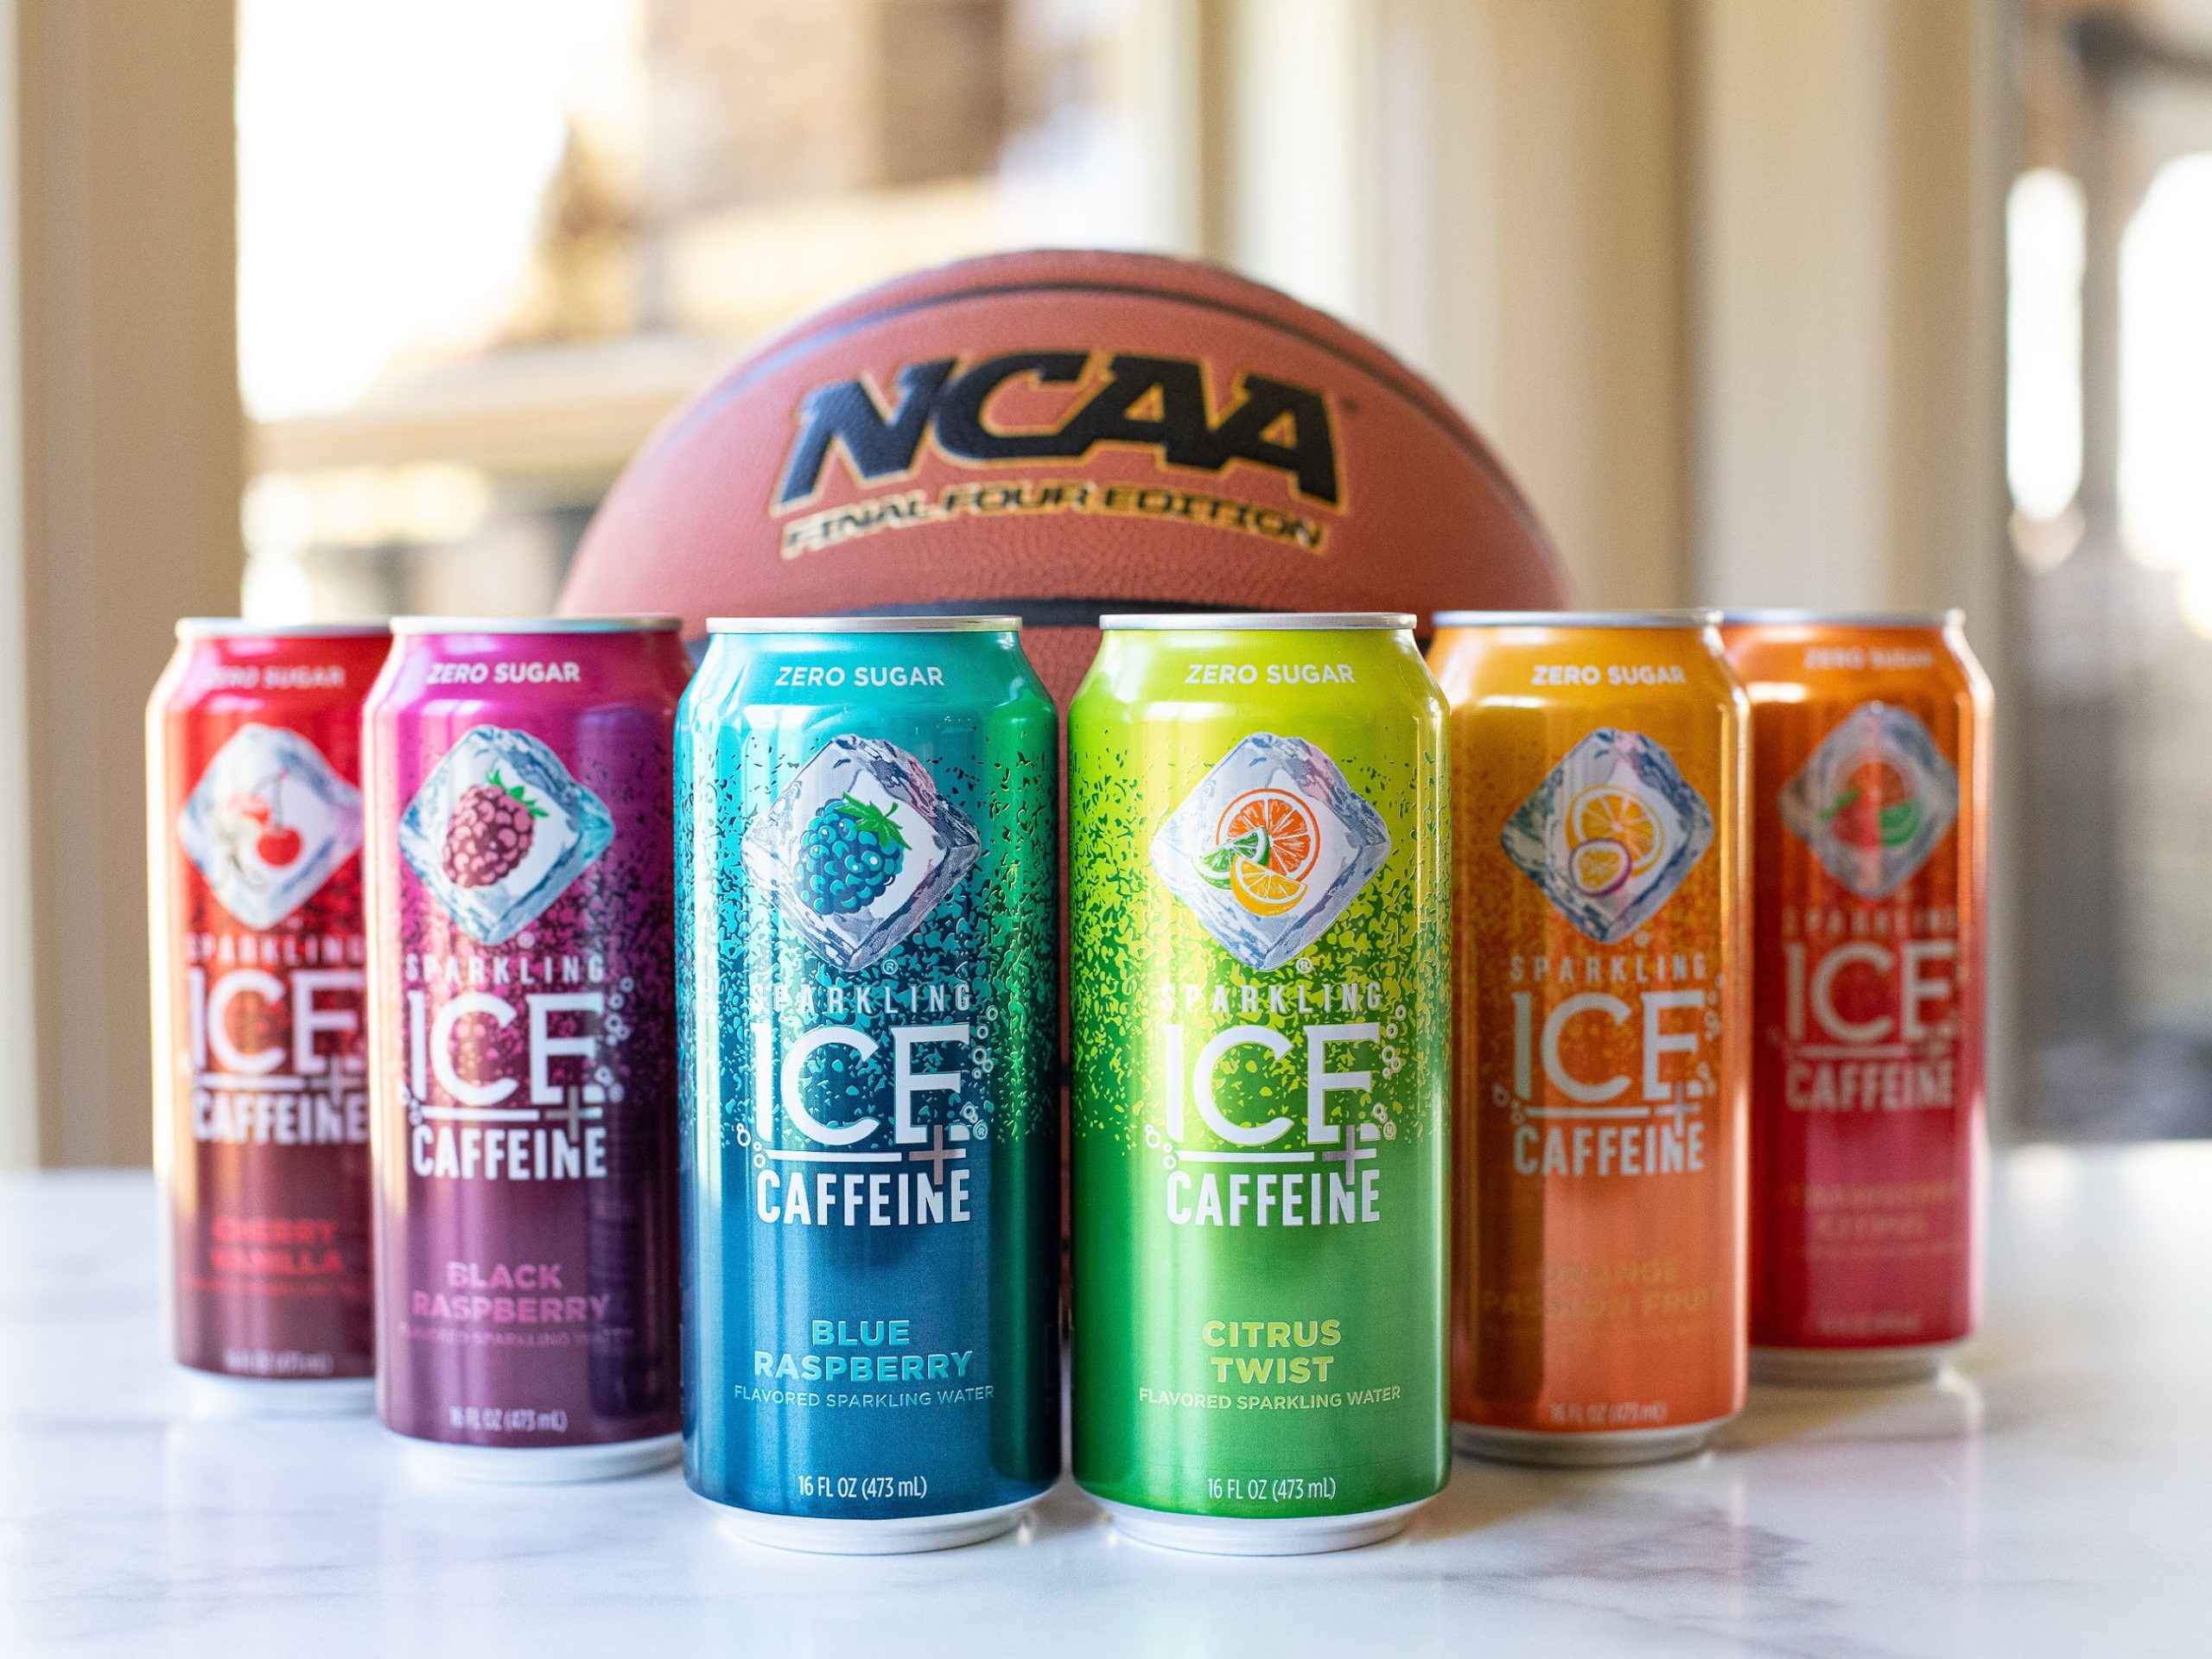 Get Ready For Game Day With Savings On Sparkling Ice +Caffeine At Publix on I Heart Publix